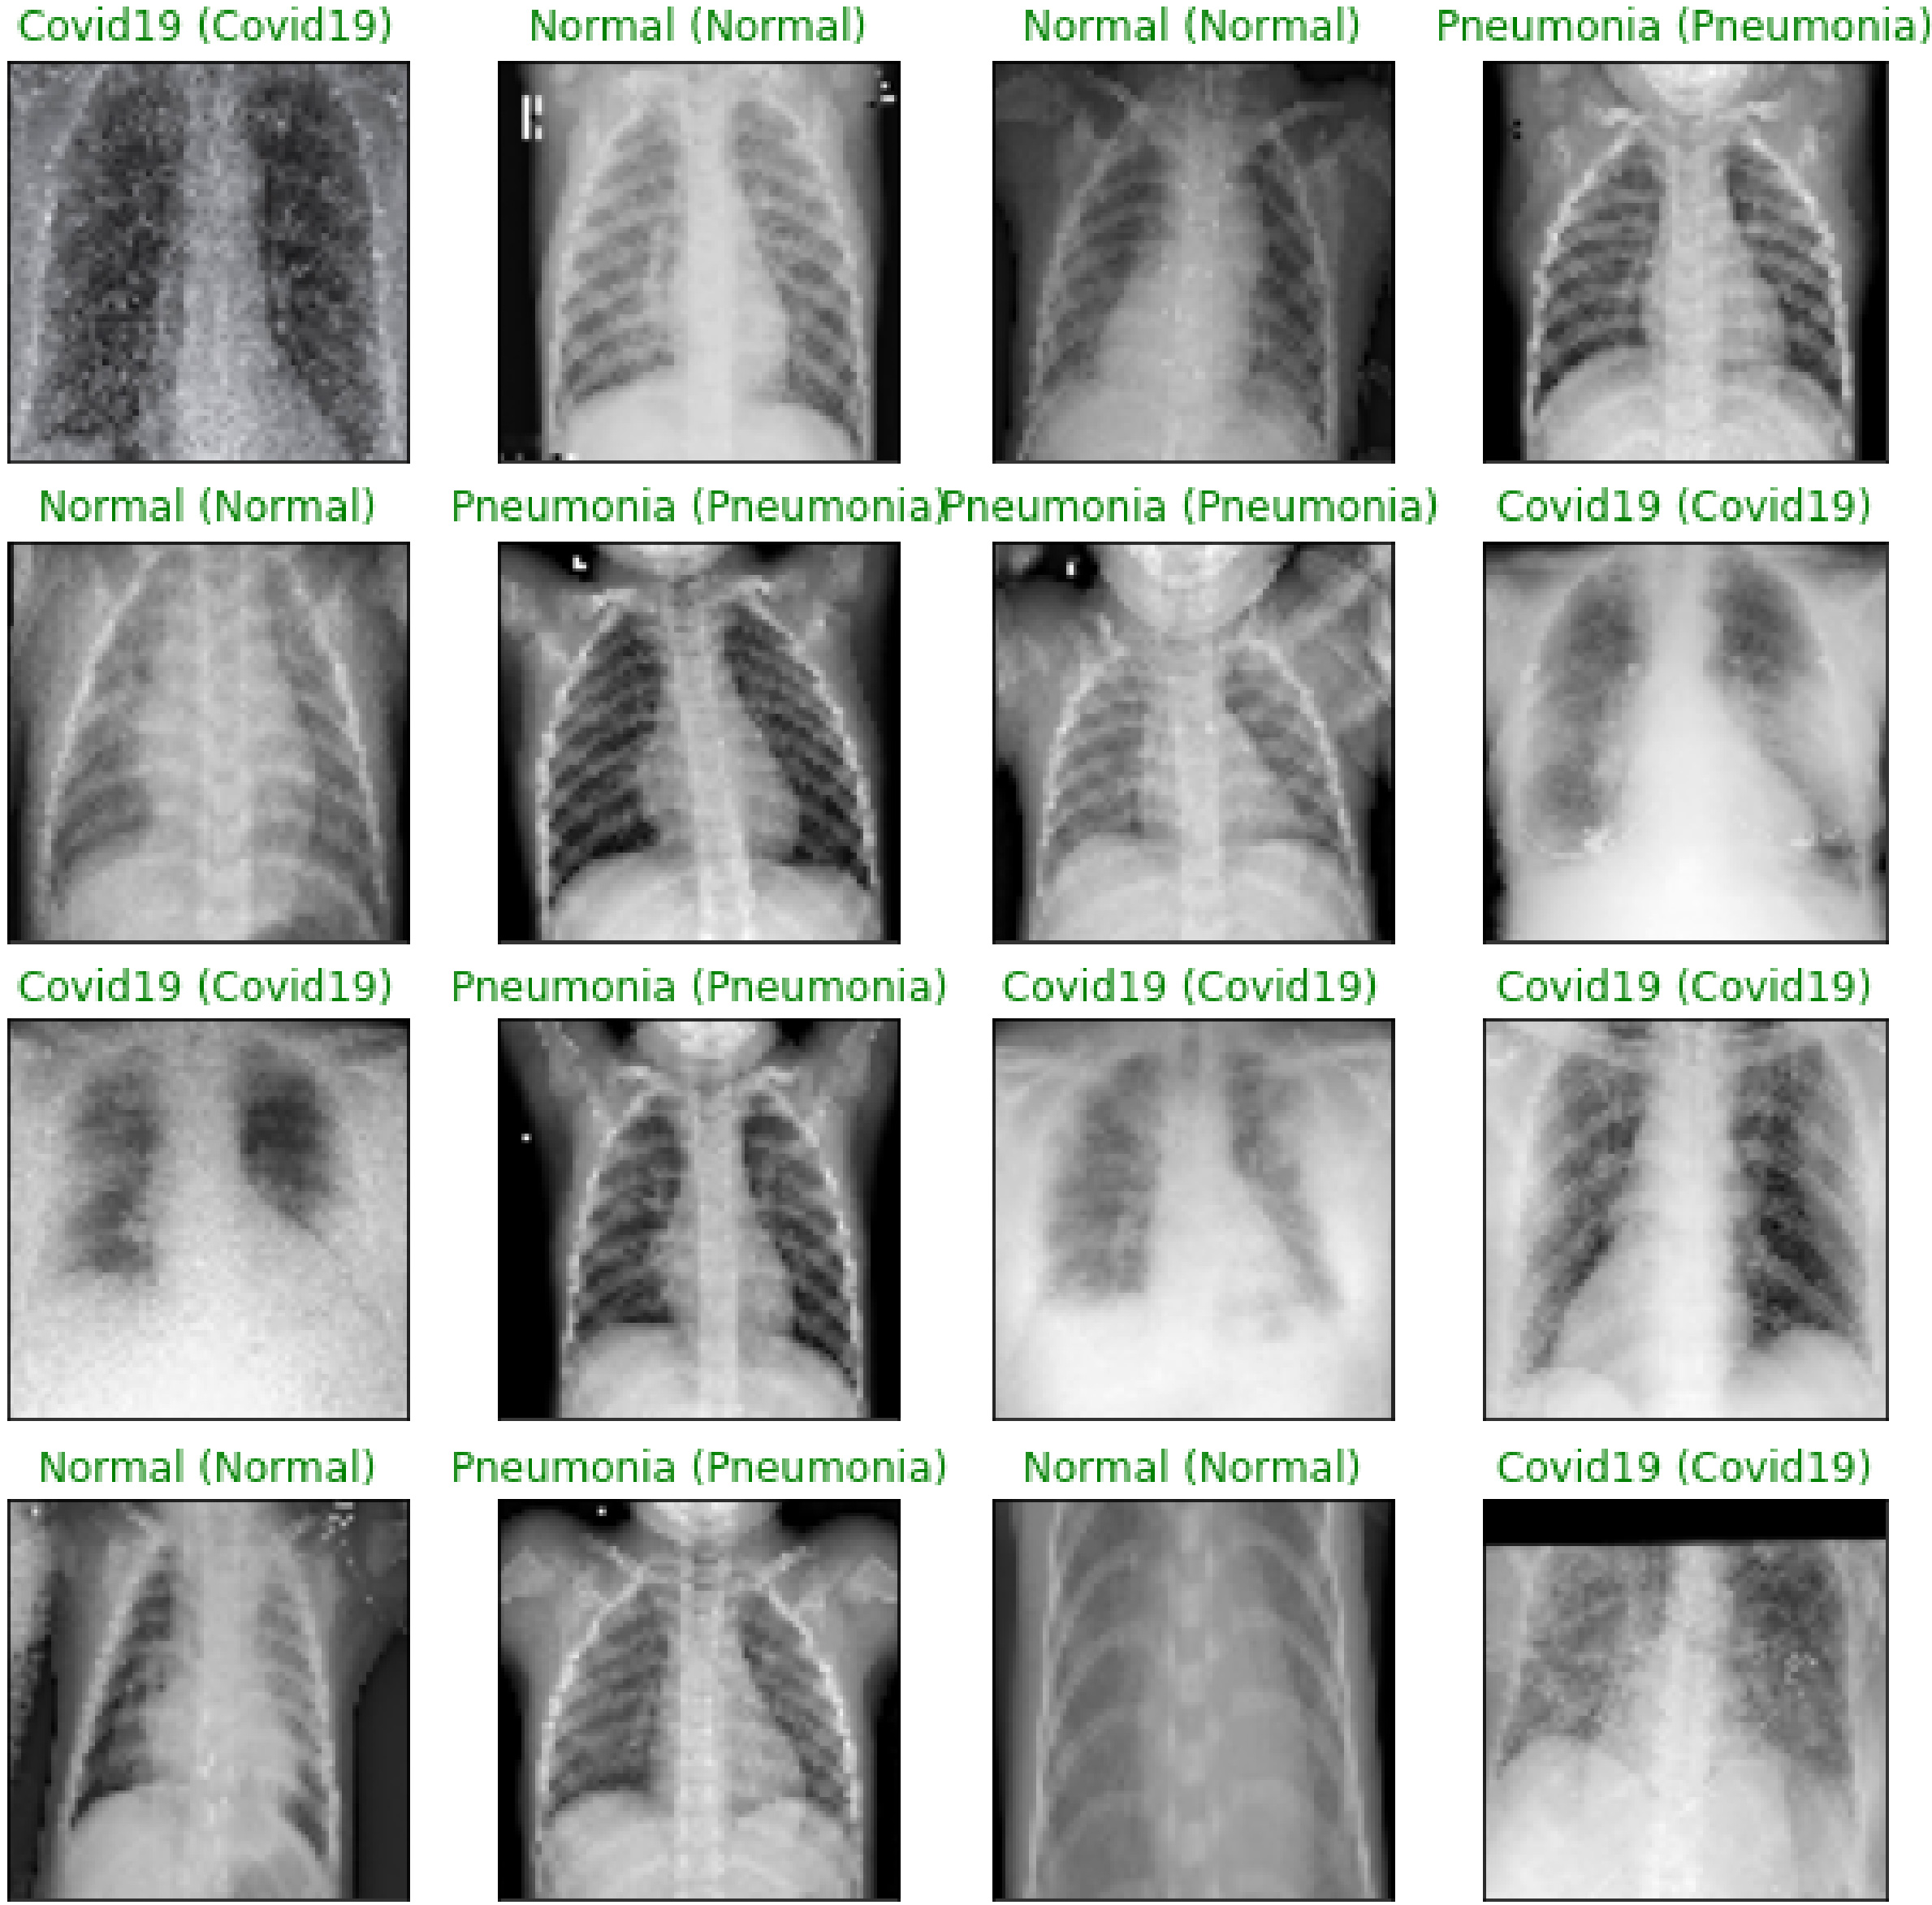 Predicted X-ray images using VGG-19 model.